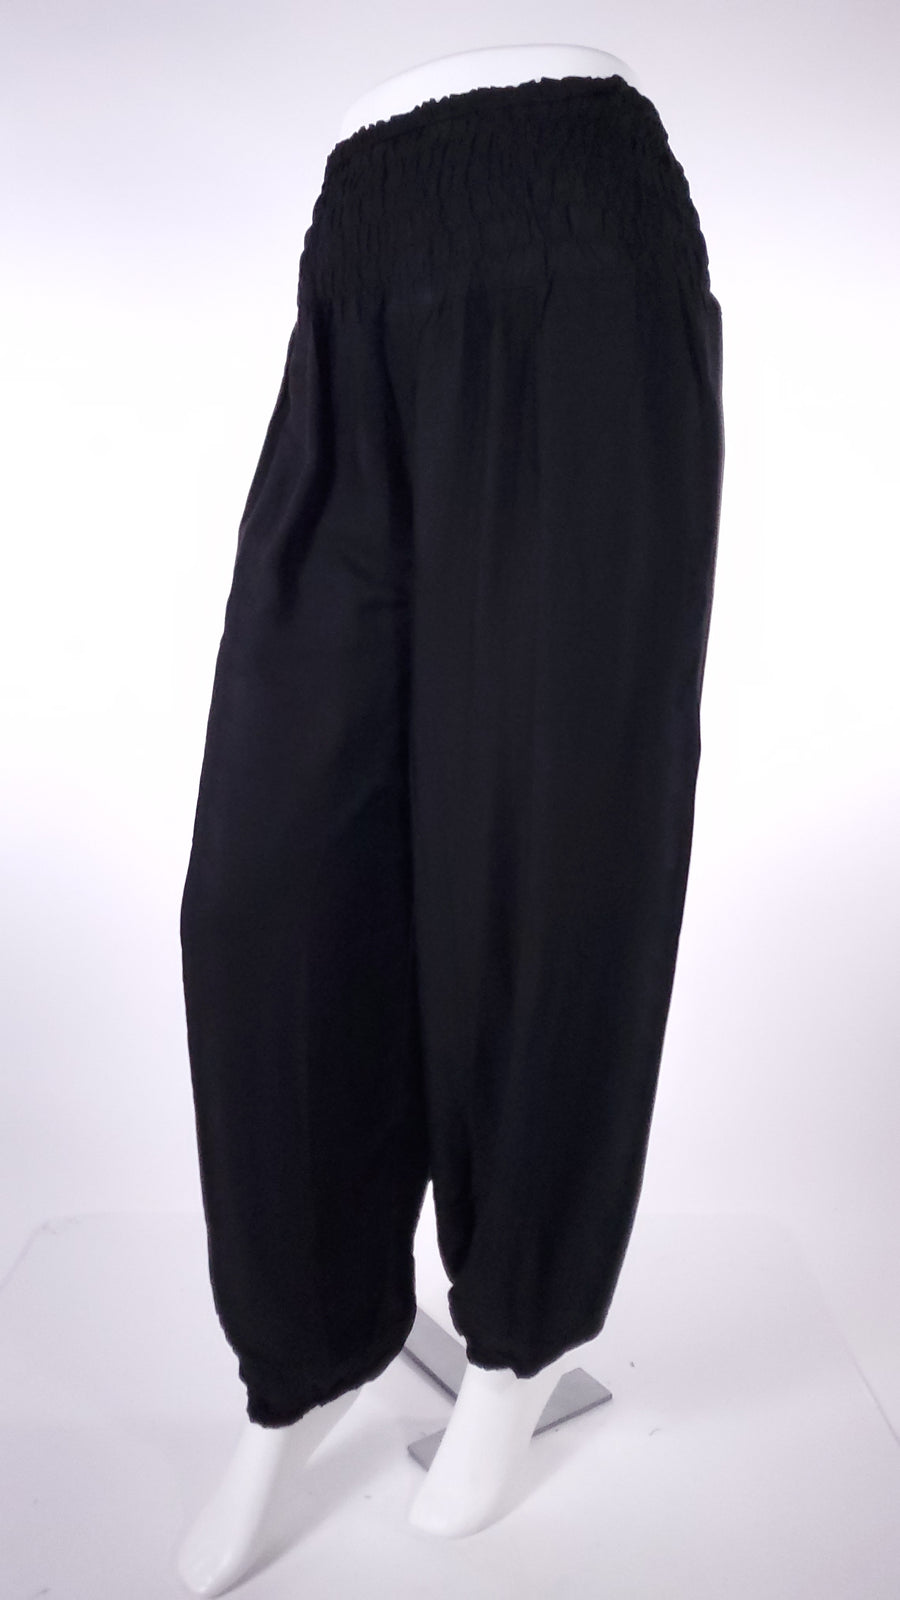 Straight Leg Harem Pants In Solid Black-The High Thai-The High Thai-Yoga Pants-Harem Pants-Hippie Clothing-San Diego